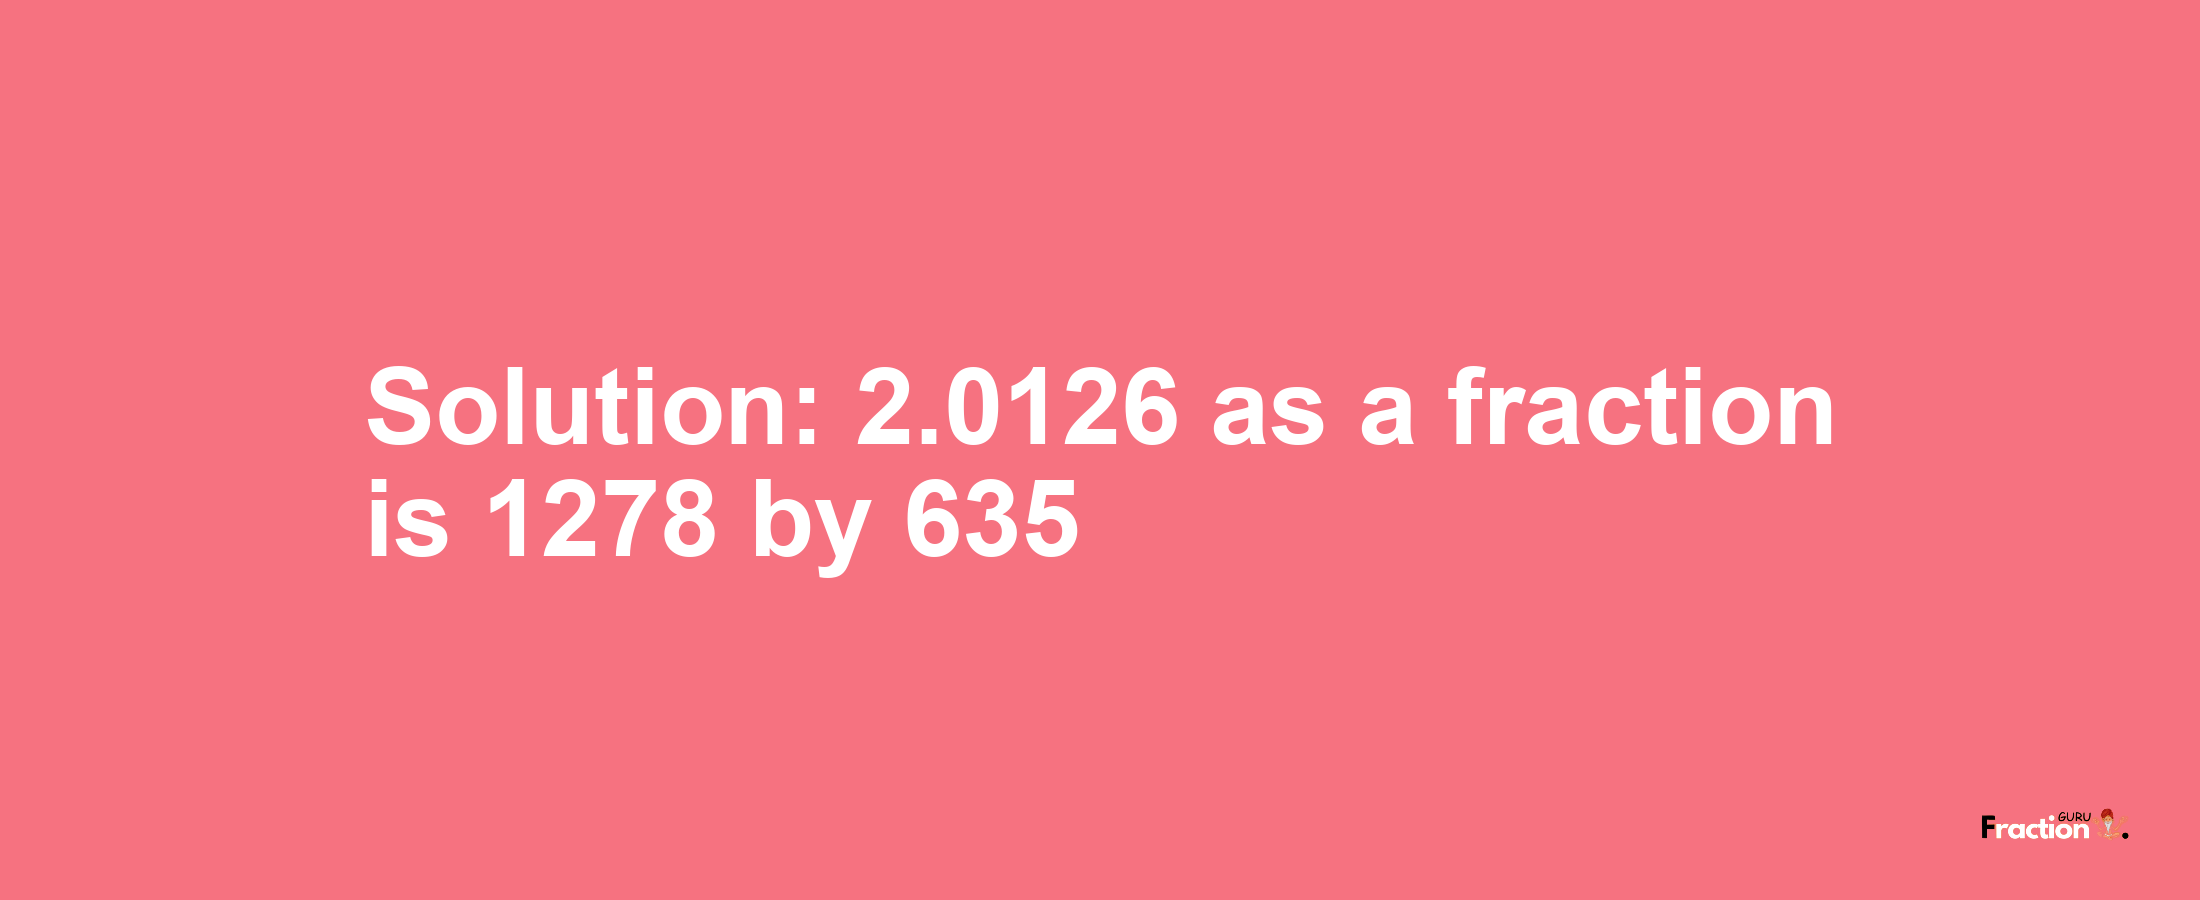 Solution:2.0126 as a fraction is 1278/635